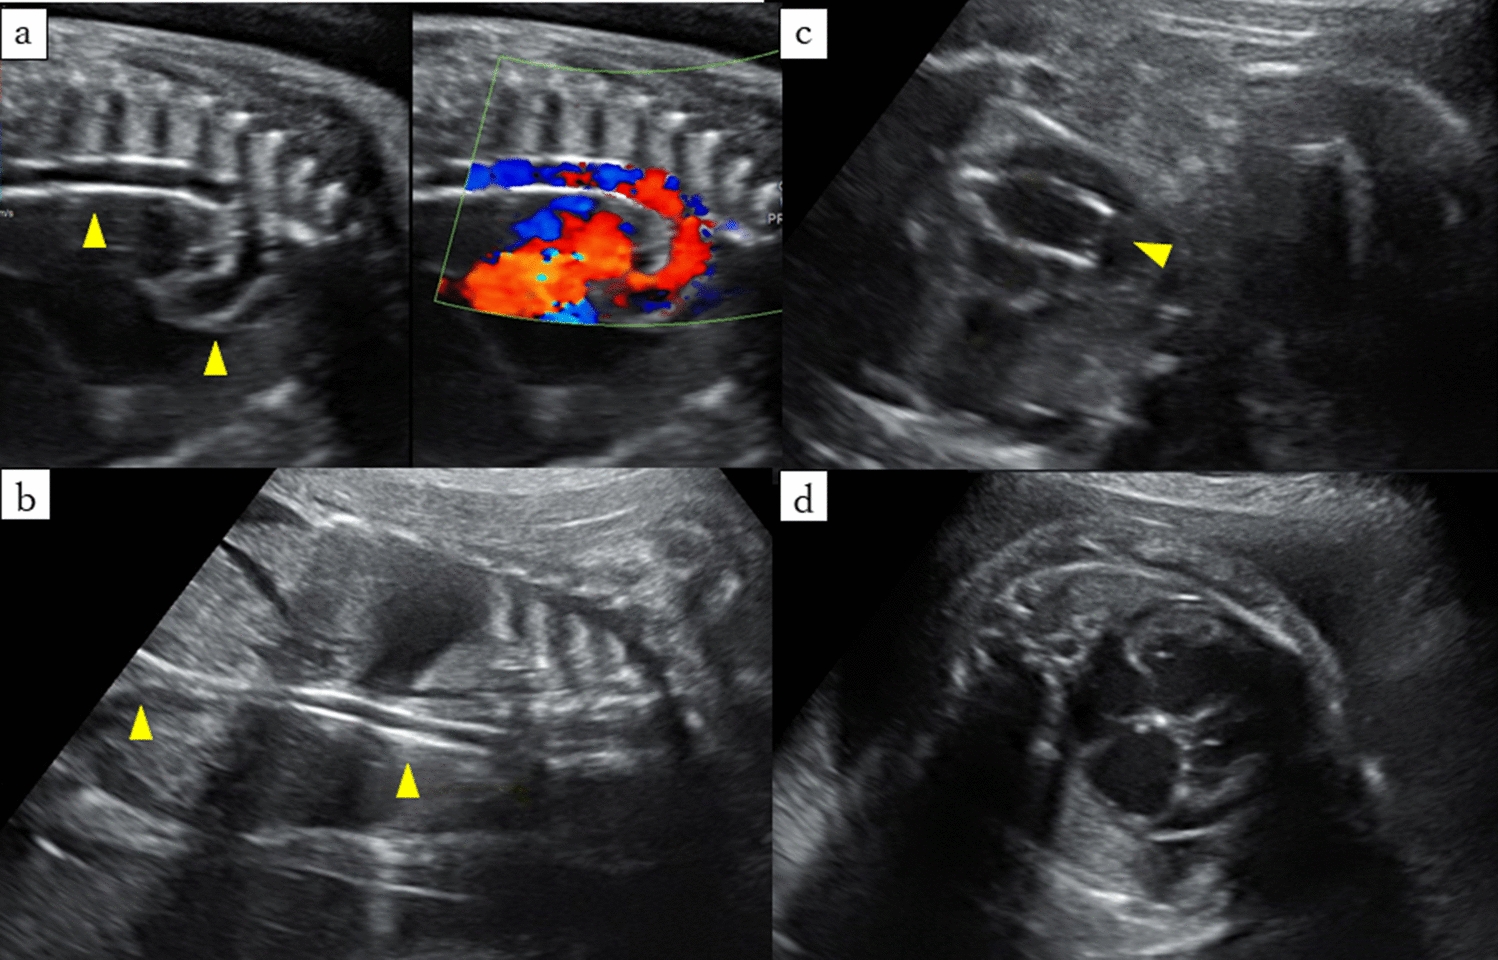 A case of fetal hydrops caused by generalized arterial calcification of infancy